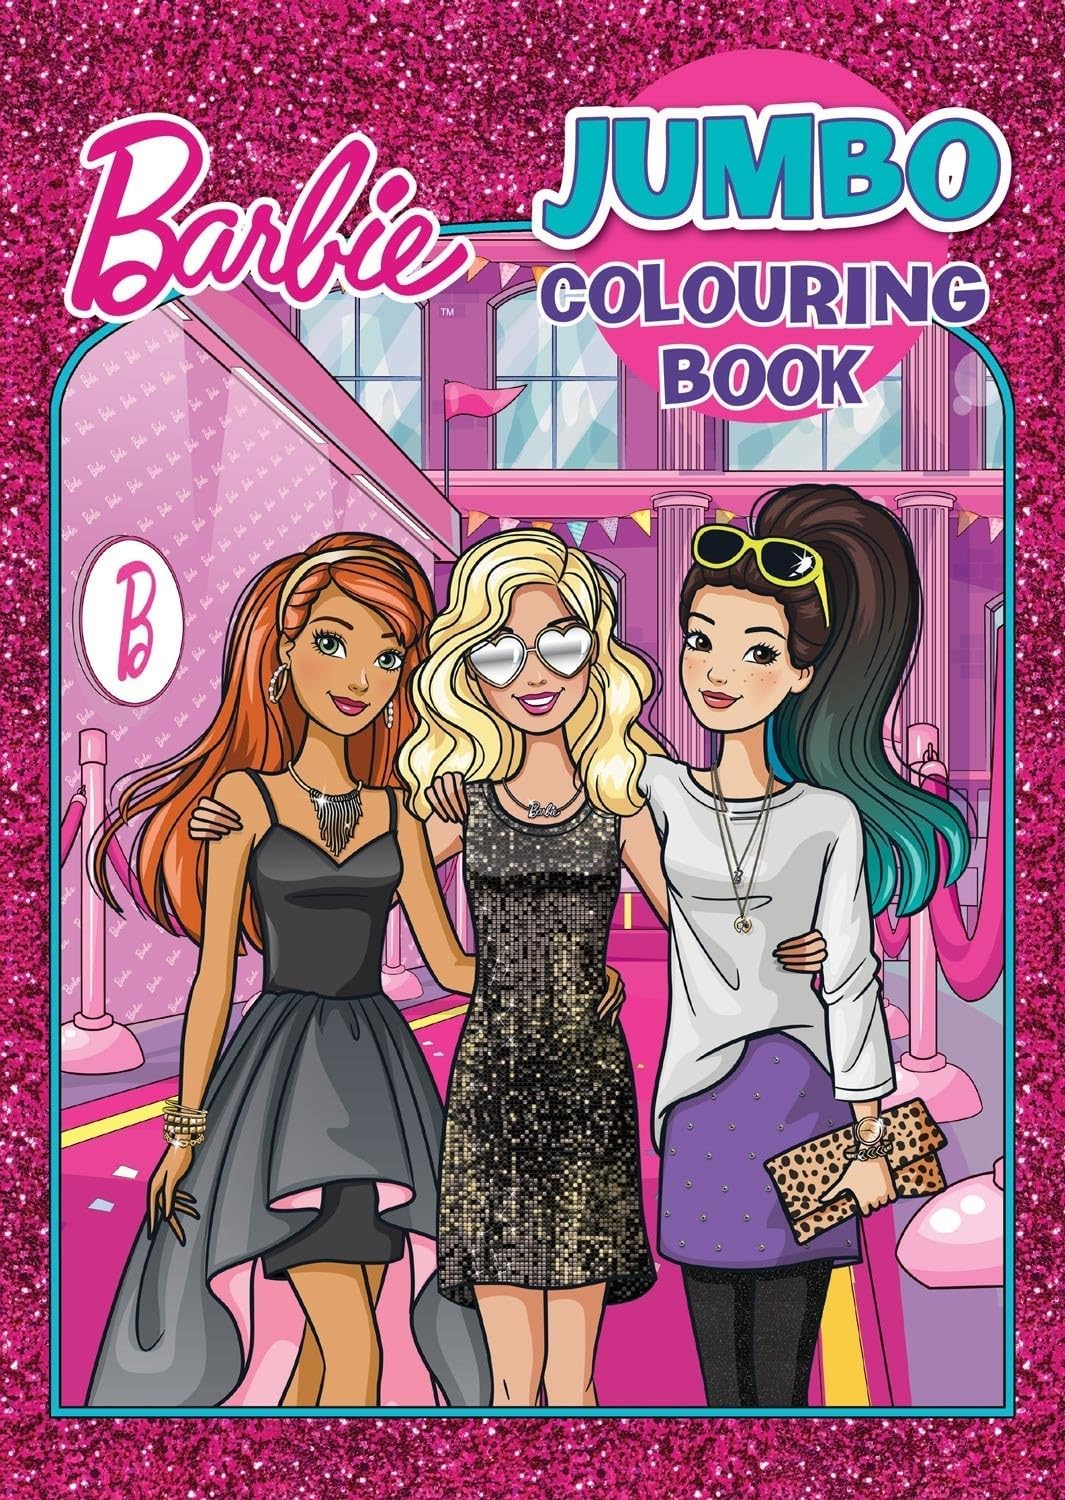 New Barbie Jumbo Colouring Book A4 Sheets Kids Children Fun Activity Ages  3+yrs